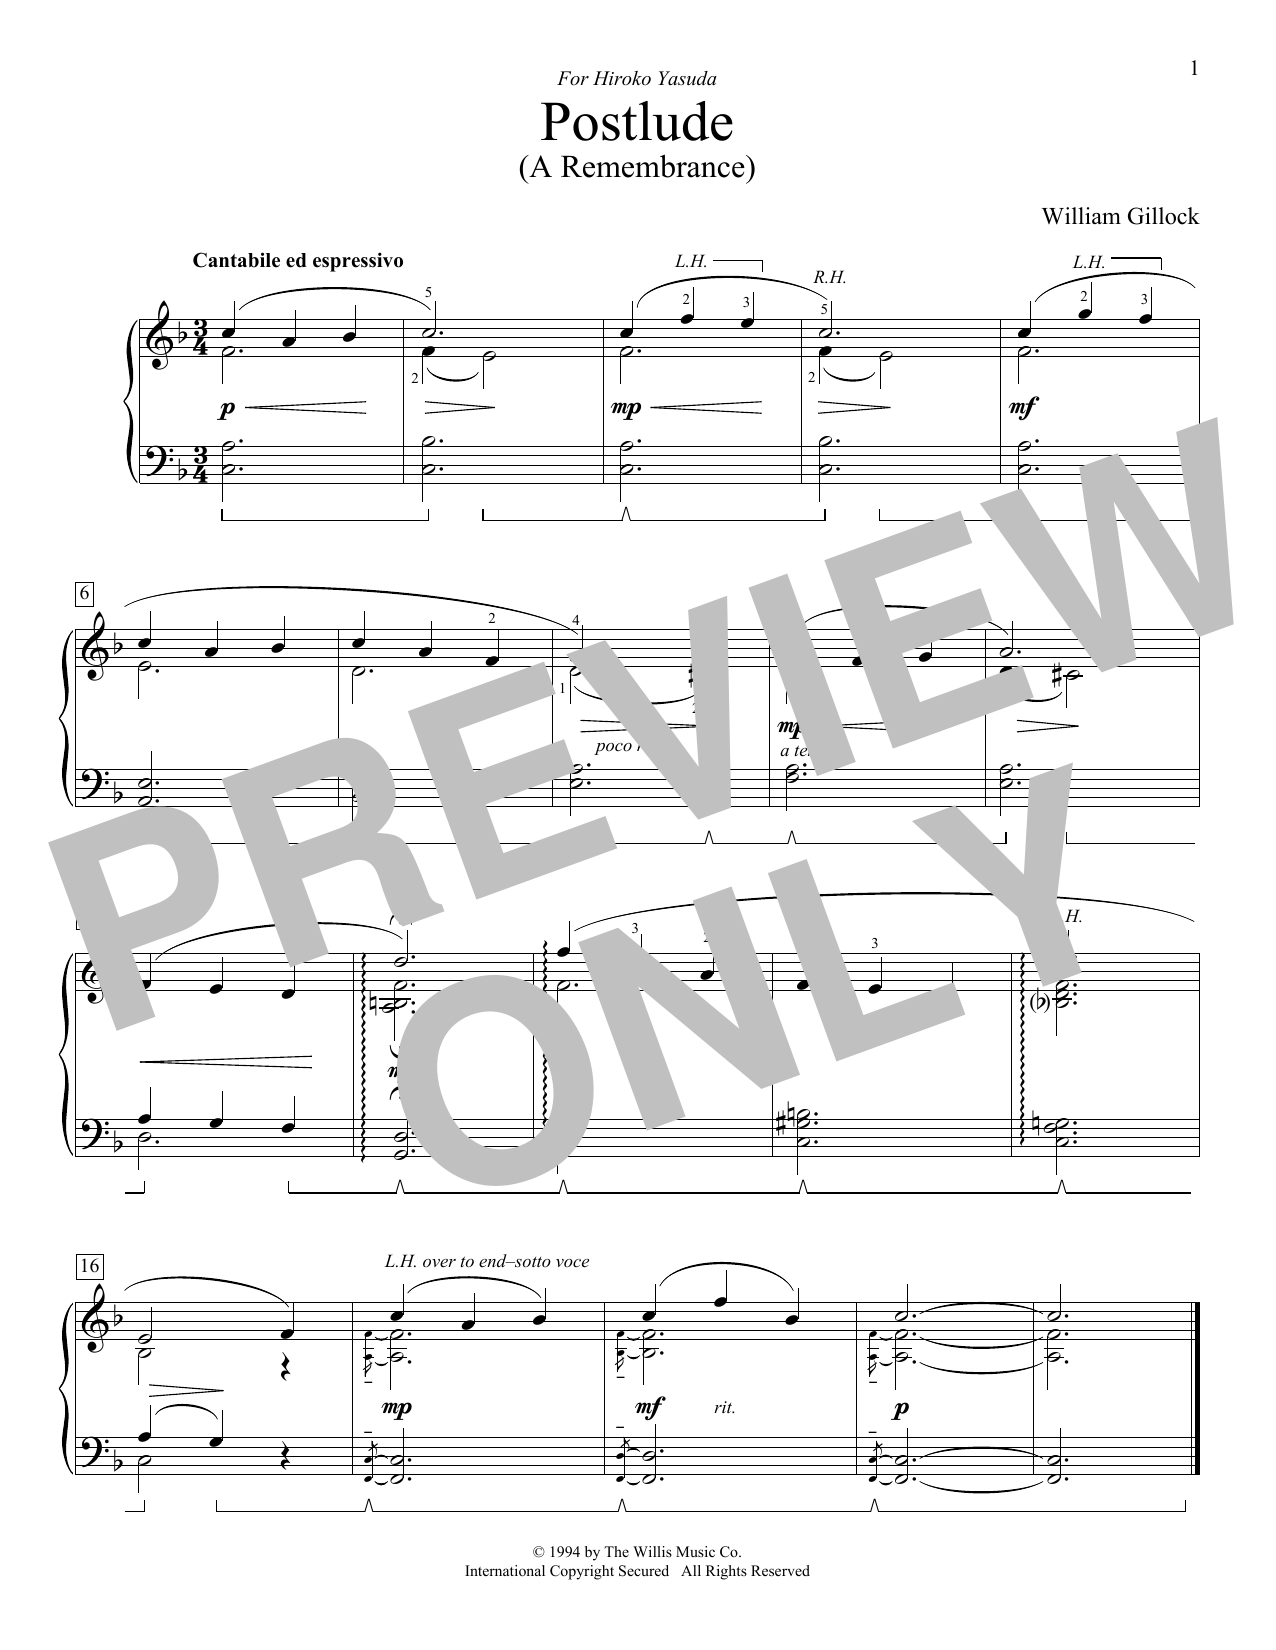 Download William Gillock Postlude (A Remembrance) Sheet Music